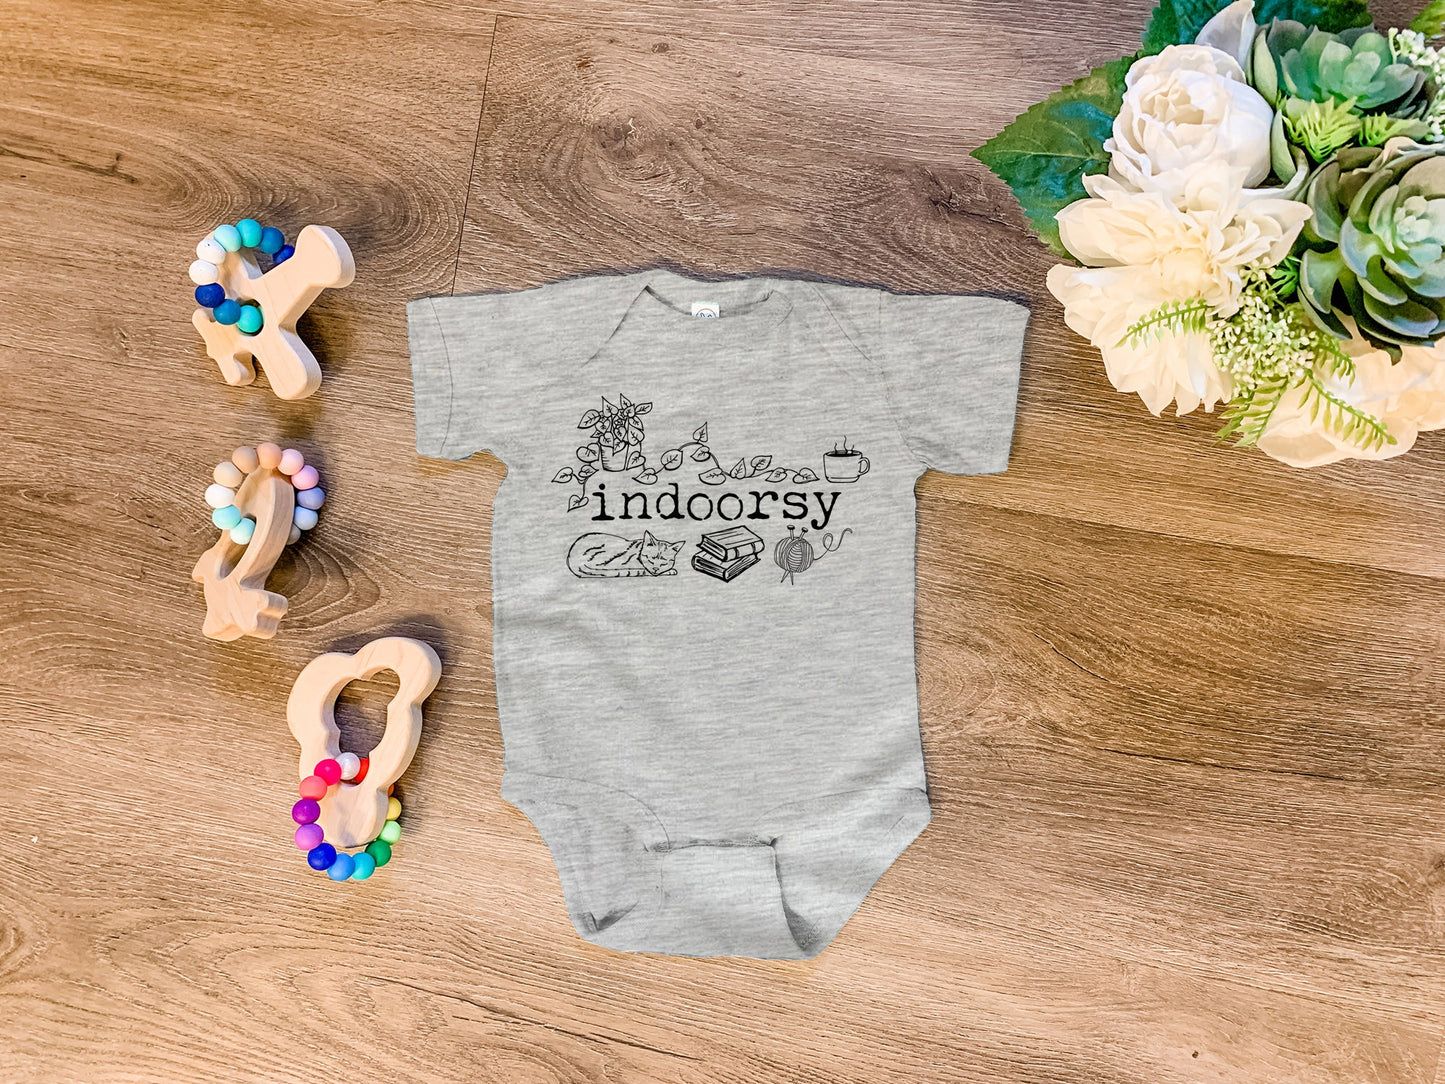 Indoorsy (Introverts, Cat) - Onesie - Heather Gray, Chill, or Lavender